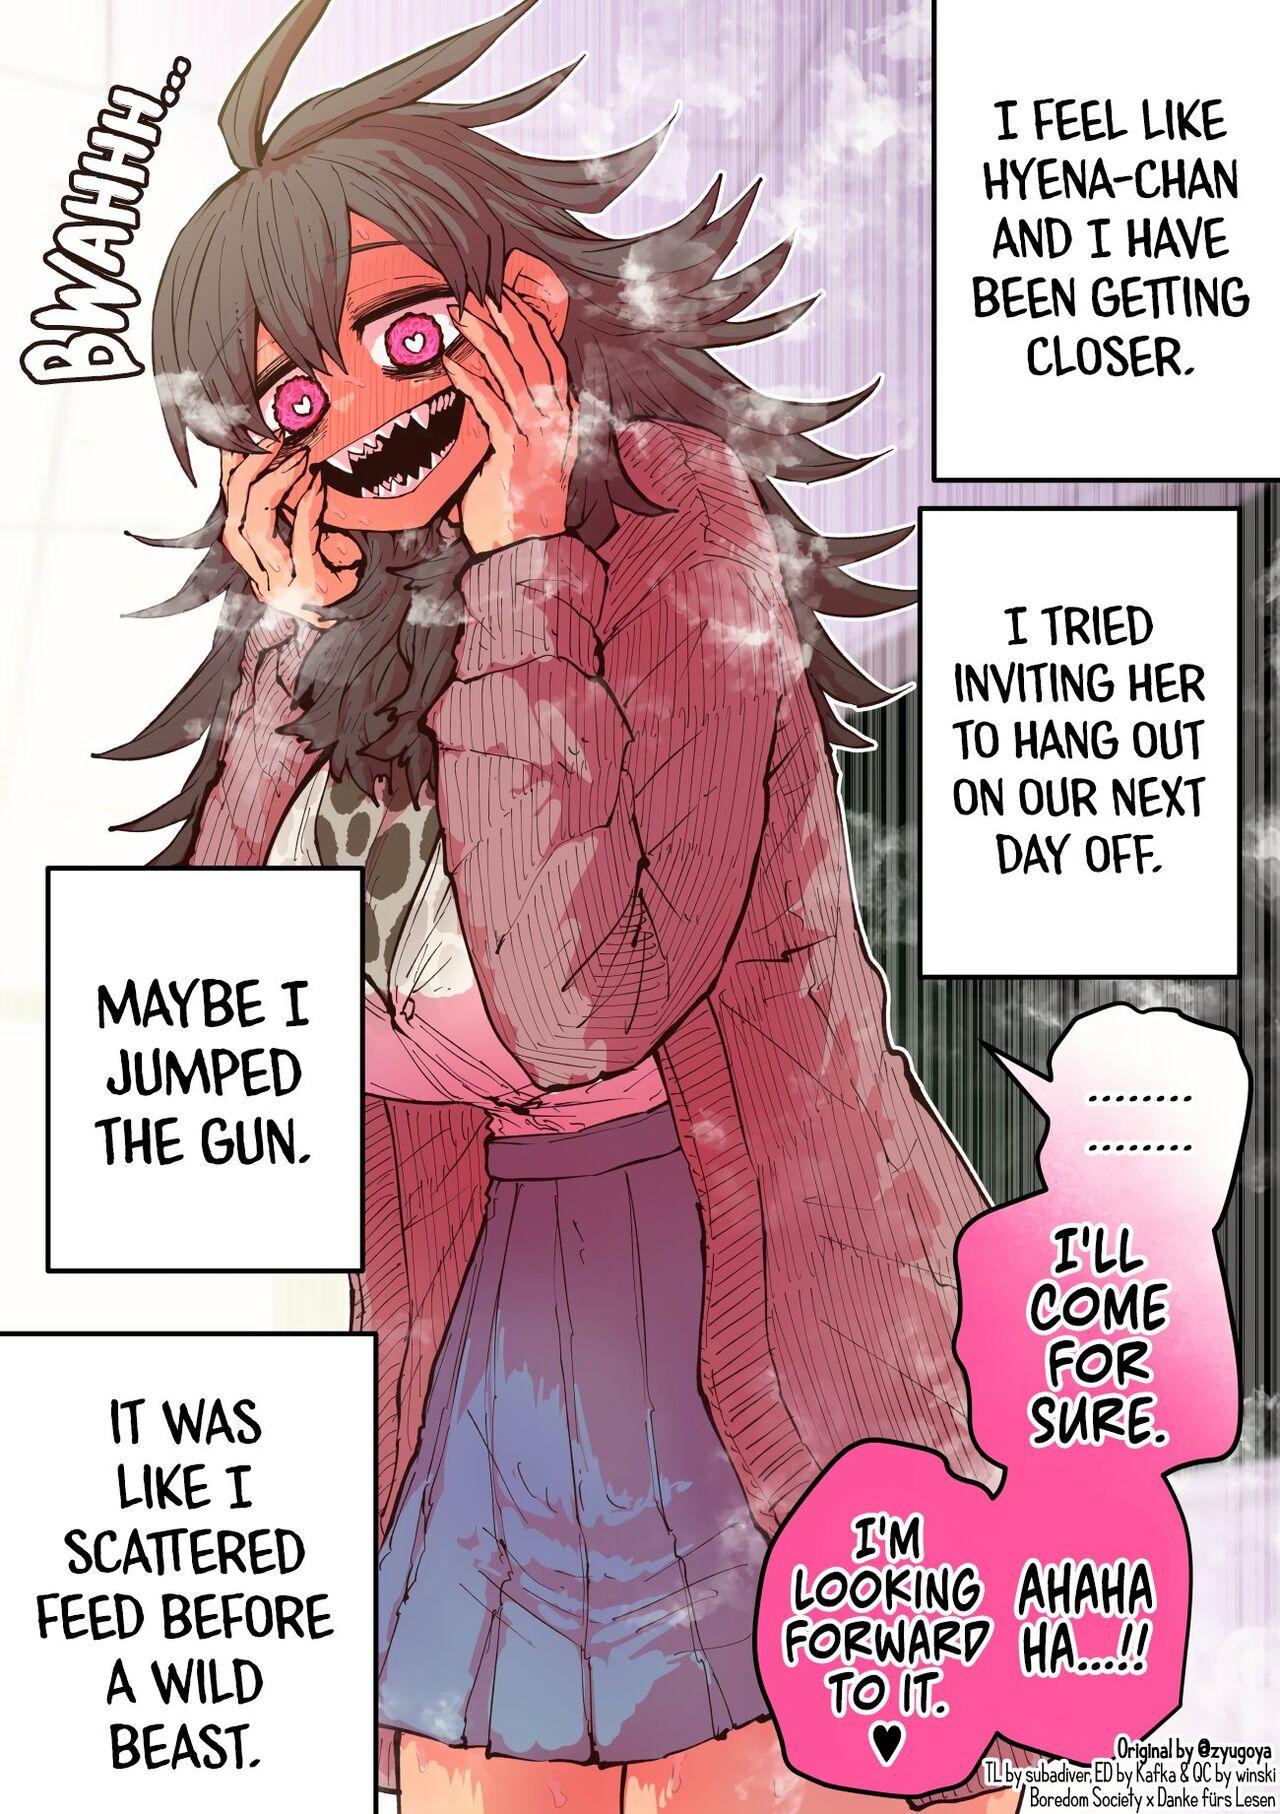 Uniform Being Targeted by Hyena-chan - Original Tinder - Page 7